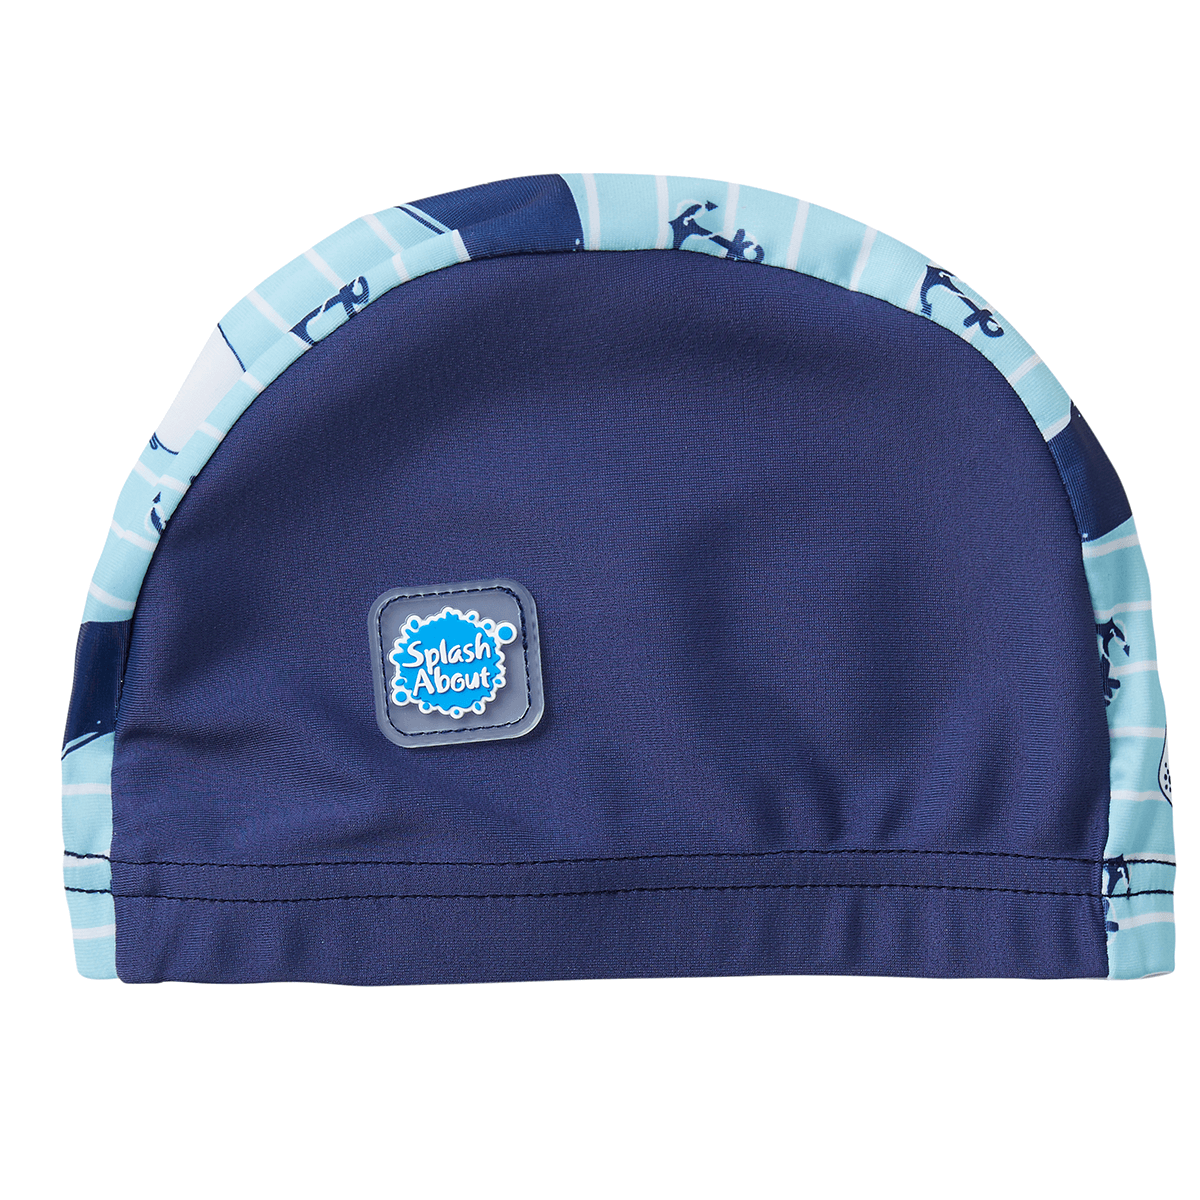 Cute baby swim hat in navy blue with light blue and white strips trims and whales themed print.